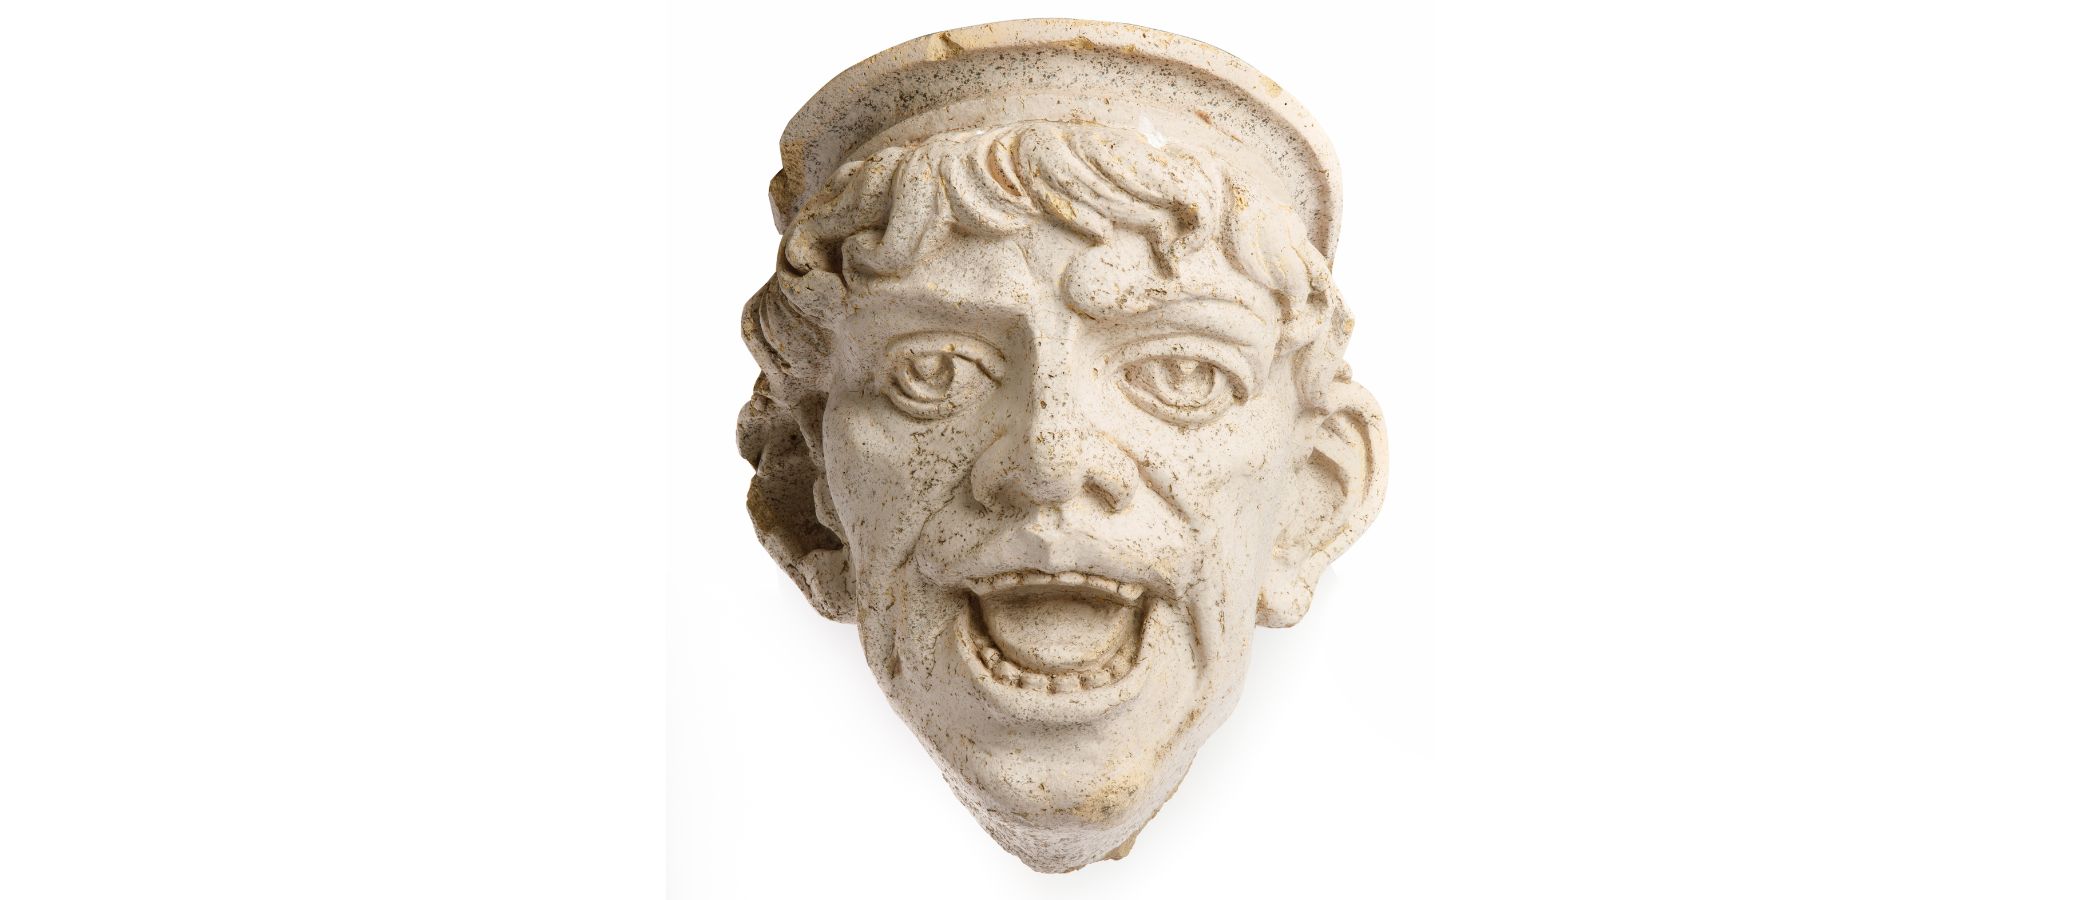 A light-coloured terra cotta head with an open mouth. The figure has shorter wavy hair and is wearing a hat with a small round brim.